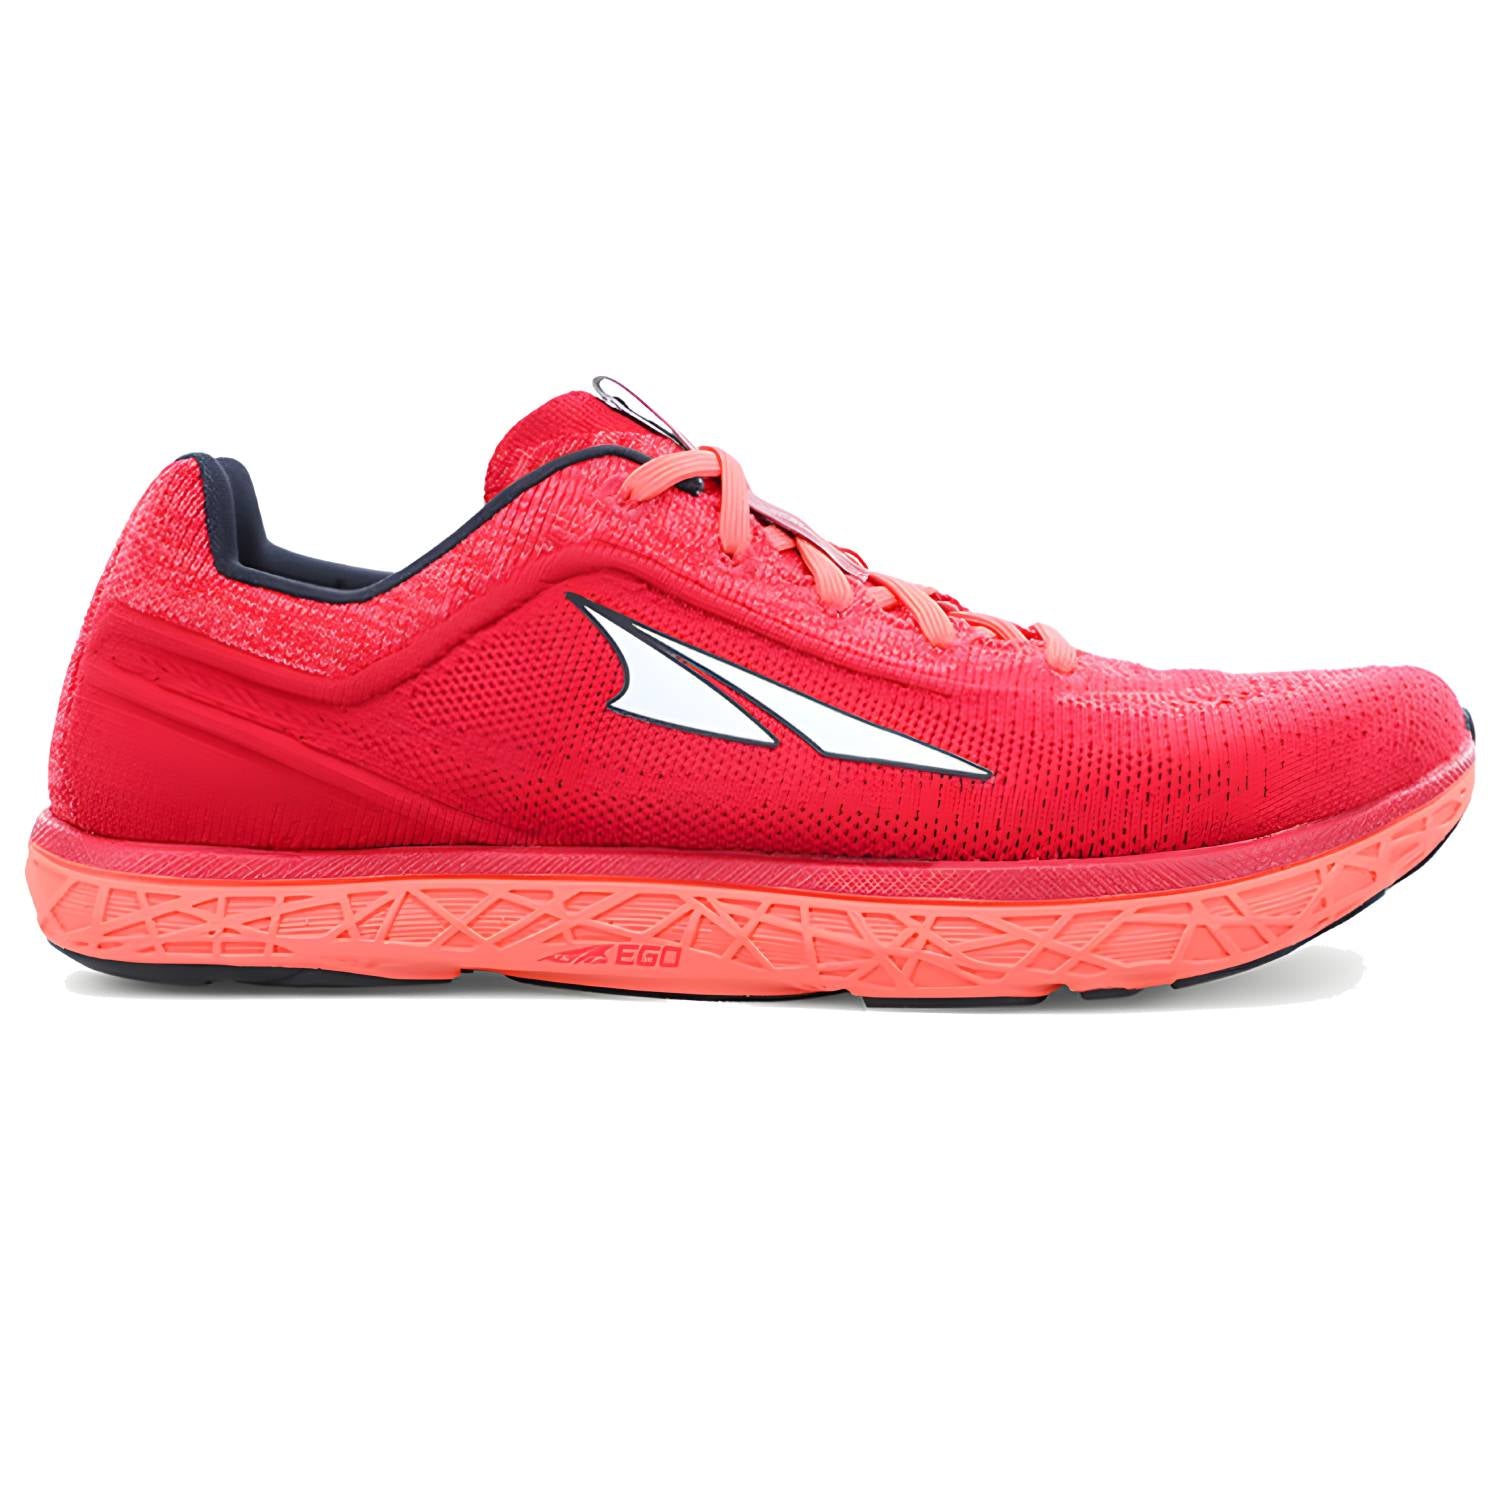 Altra Torin 2.5 Uk Outlet | head.hesge.ch